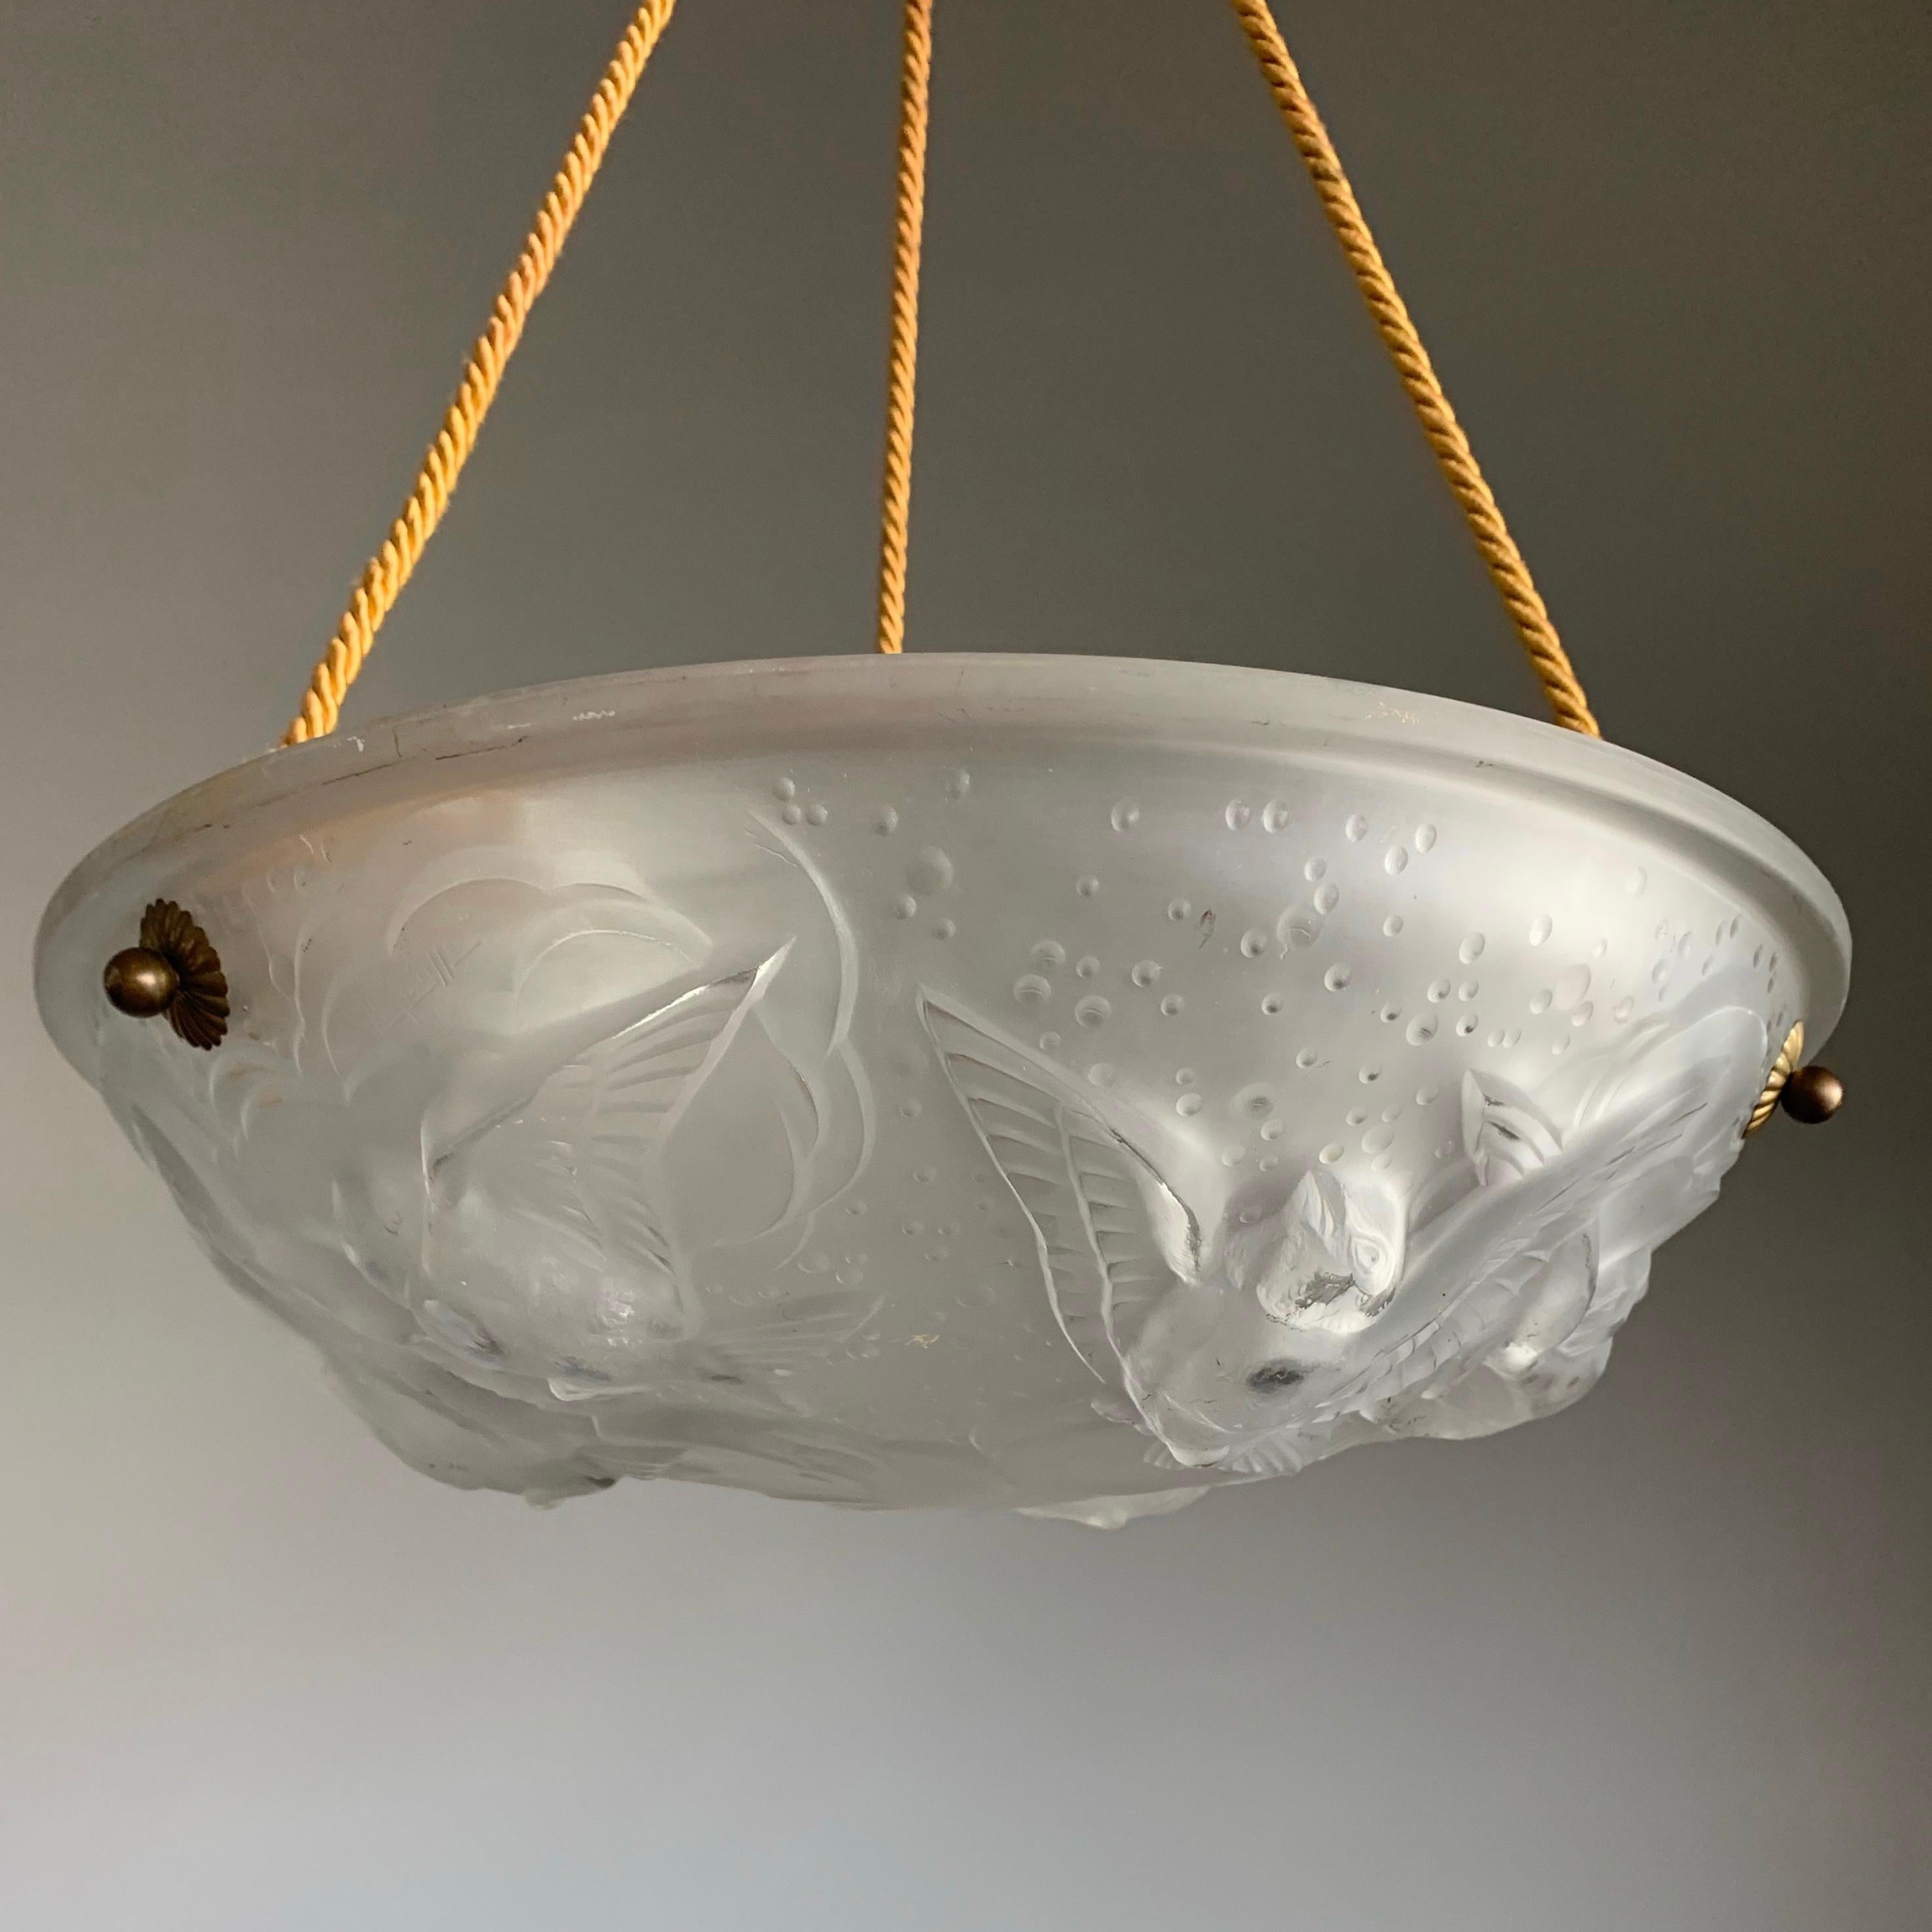 20th Century Stylish Art Deco Chandelier, Frosted Glass with Flying House Sparrows by Muller For Sale